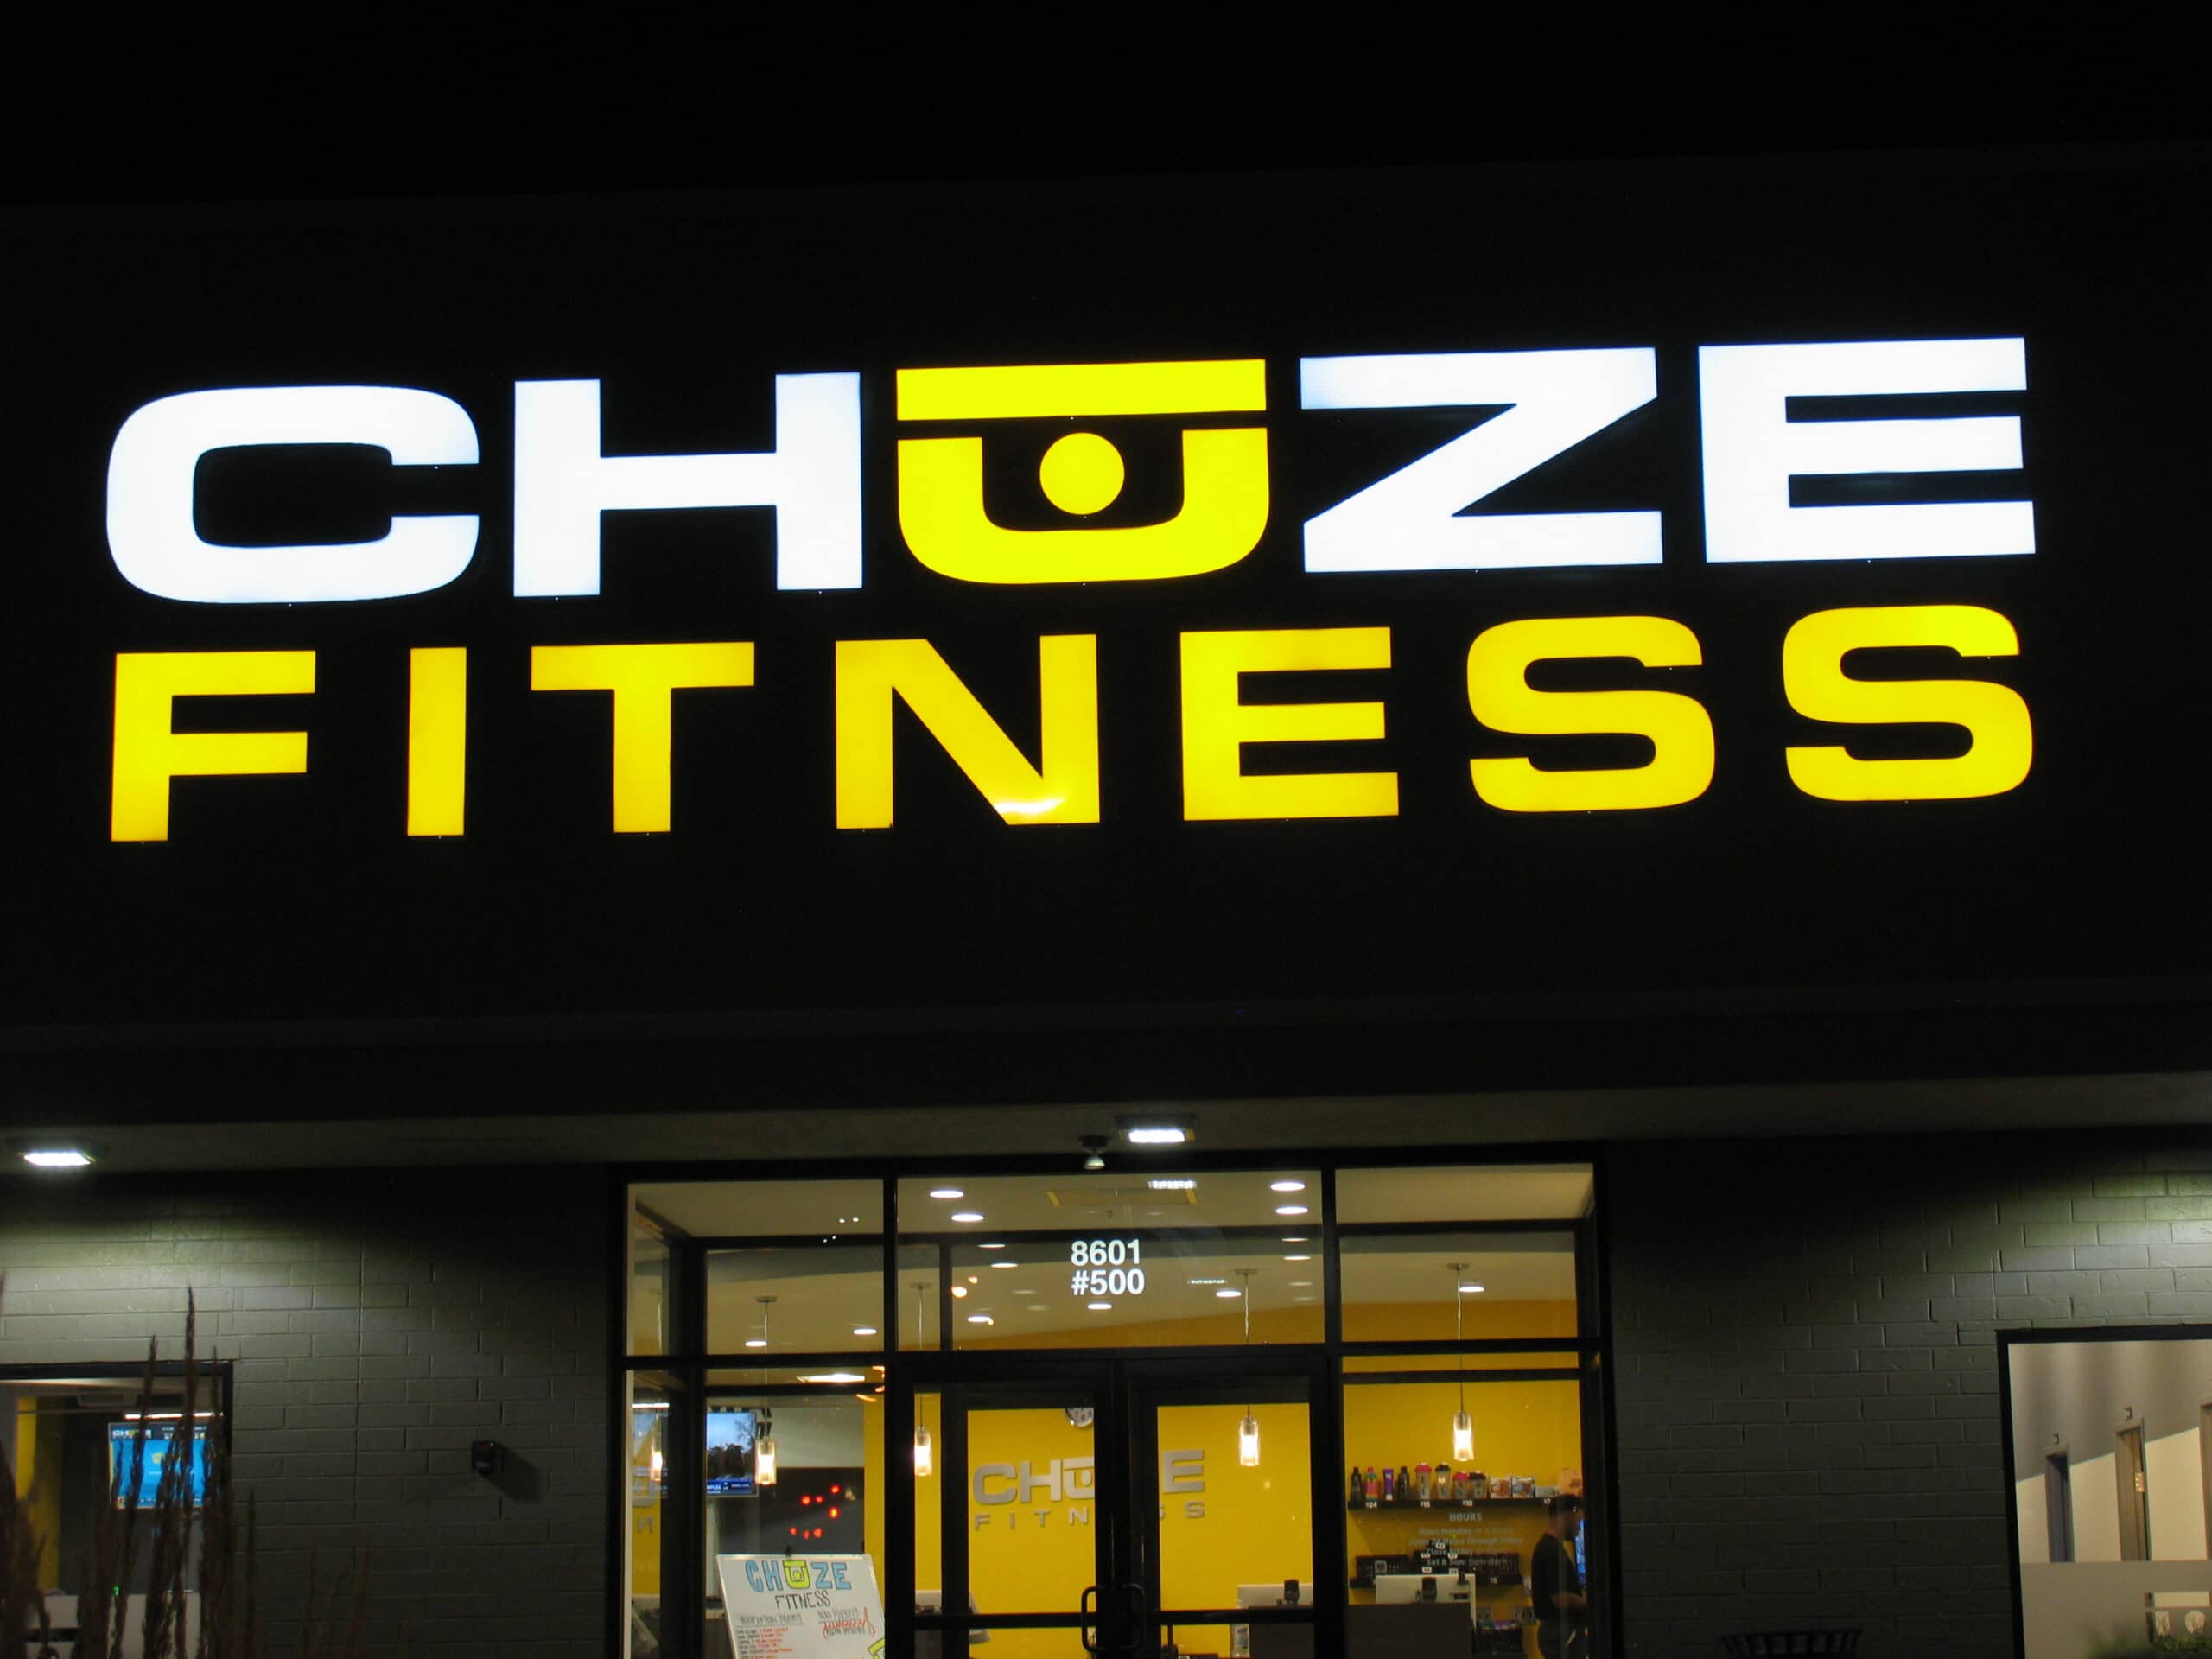 Chuze Fitness Channel Letter Sign